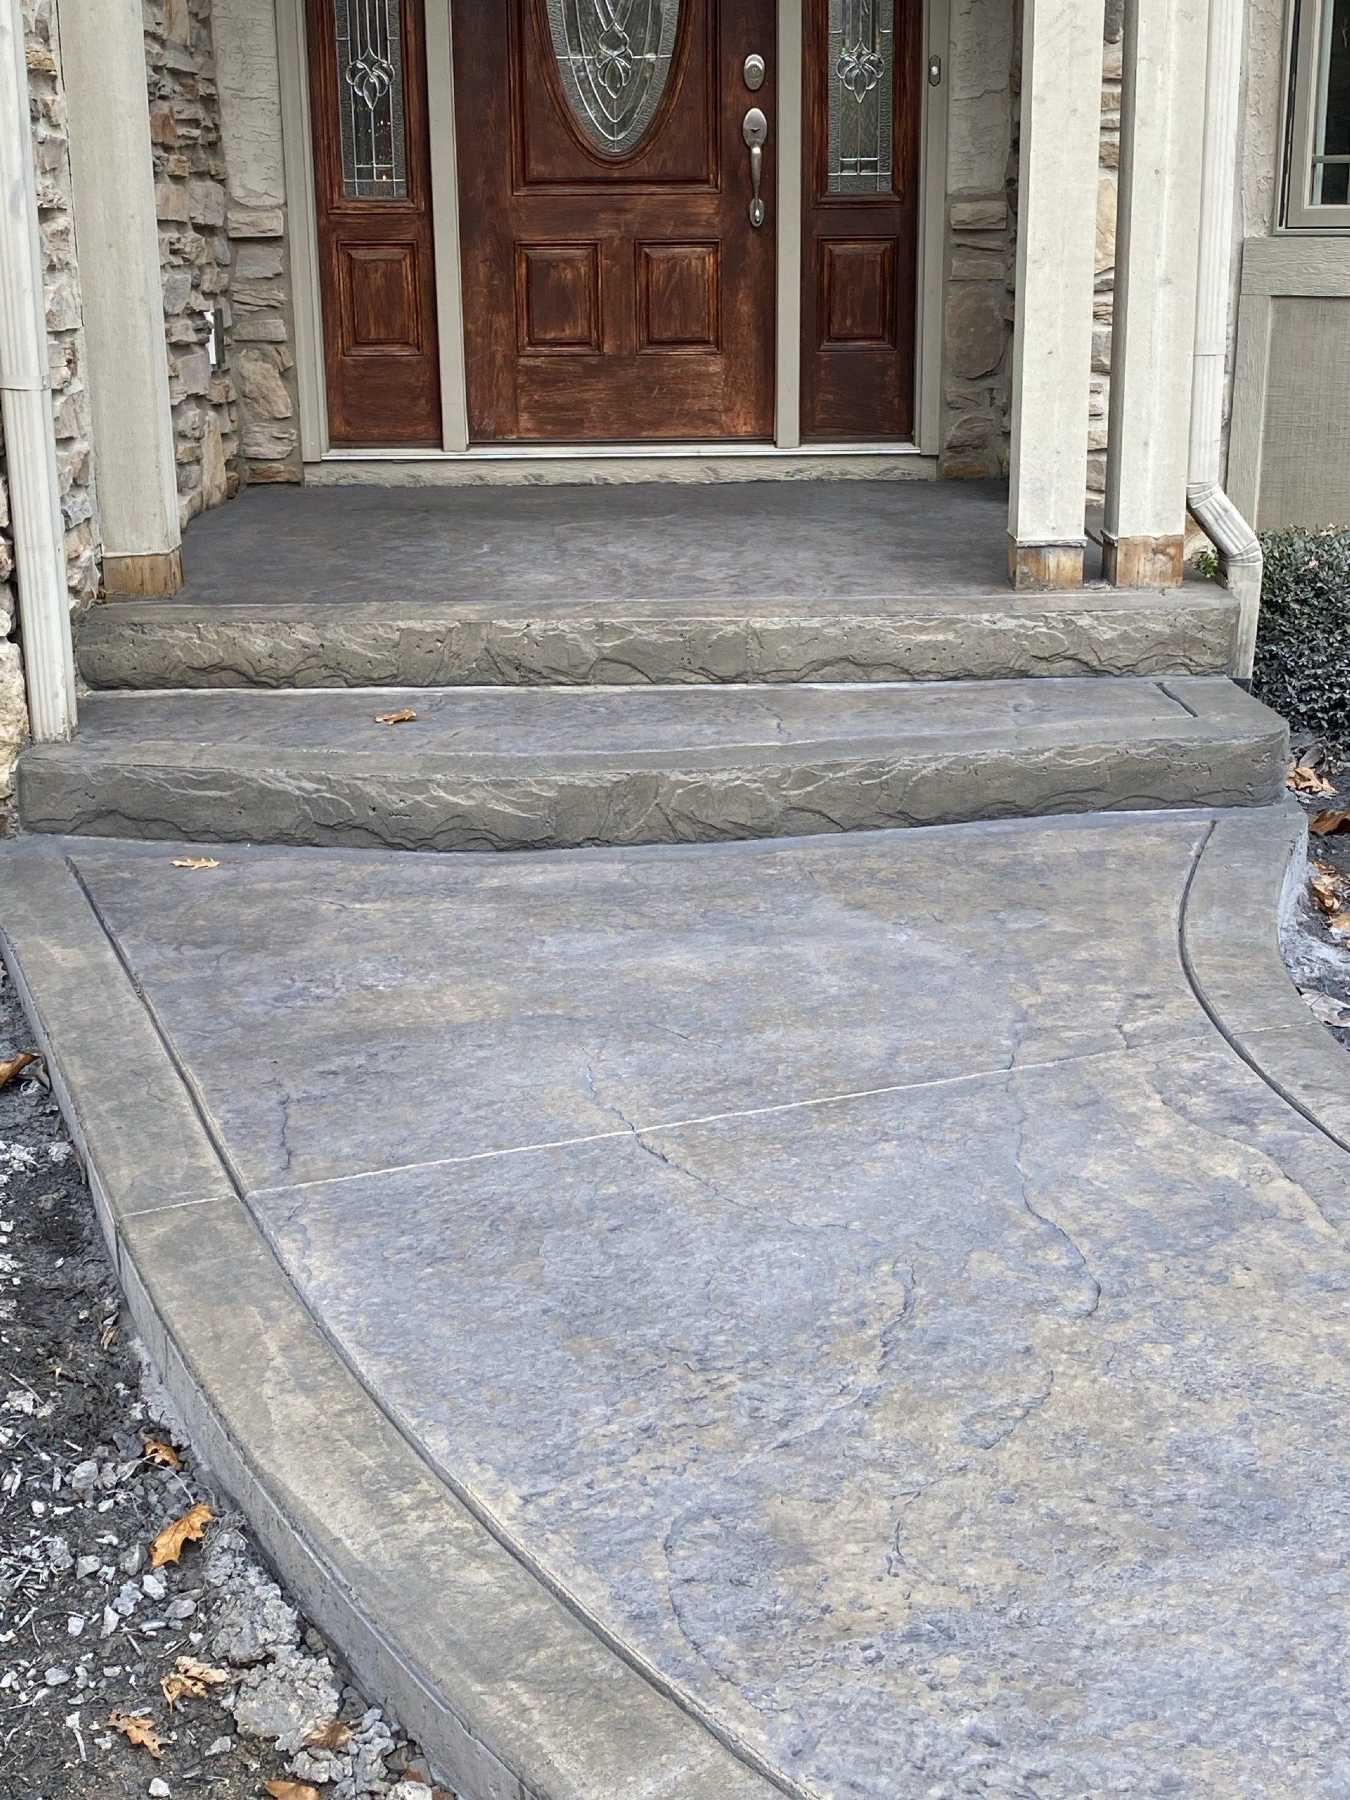 A stamped concrete sidewalk leads to a door entry with two steps.